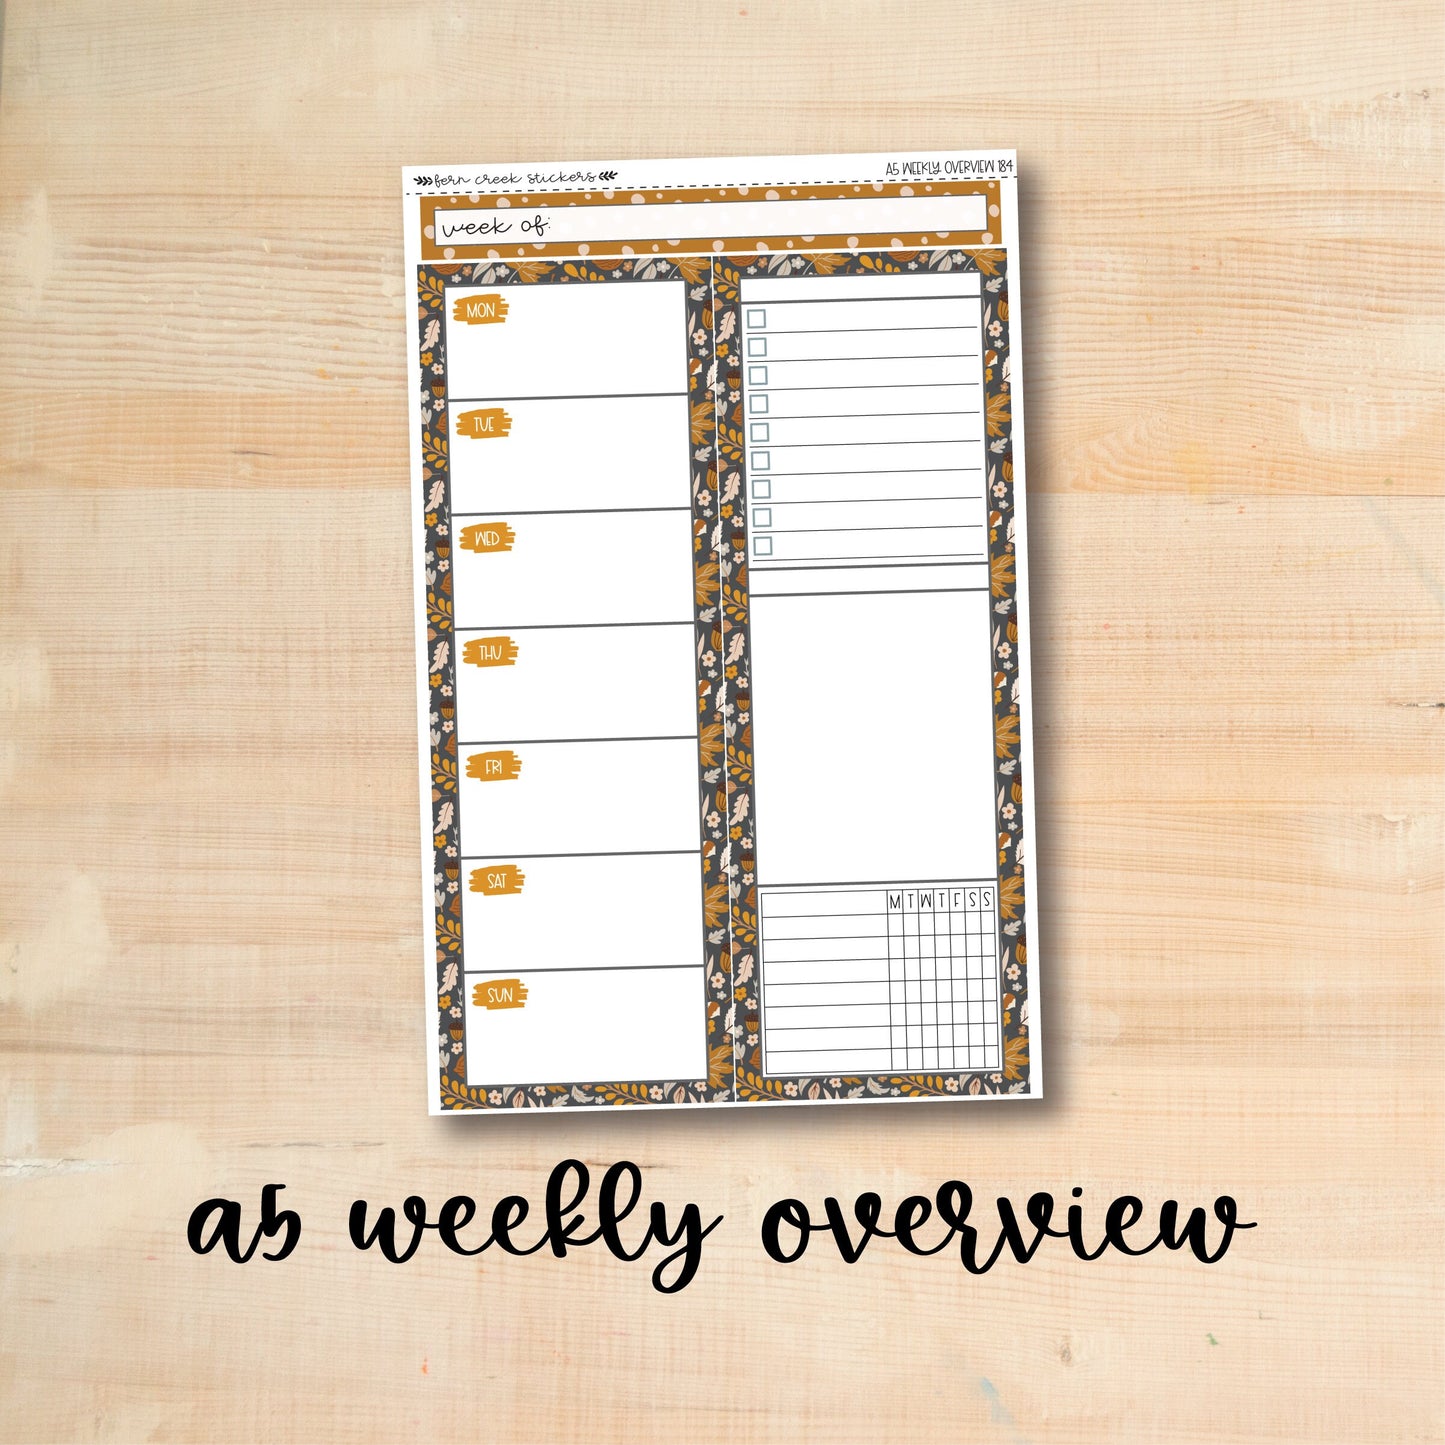 A5-WO 184 || AUTUMN DREAMS A5 Daily Duo Erin Condren Weekly Overview